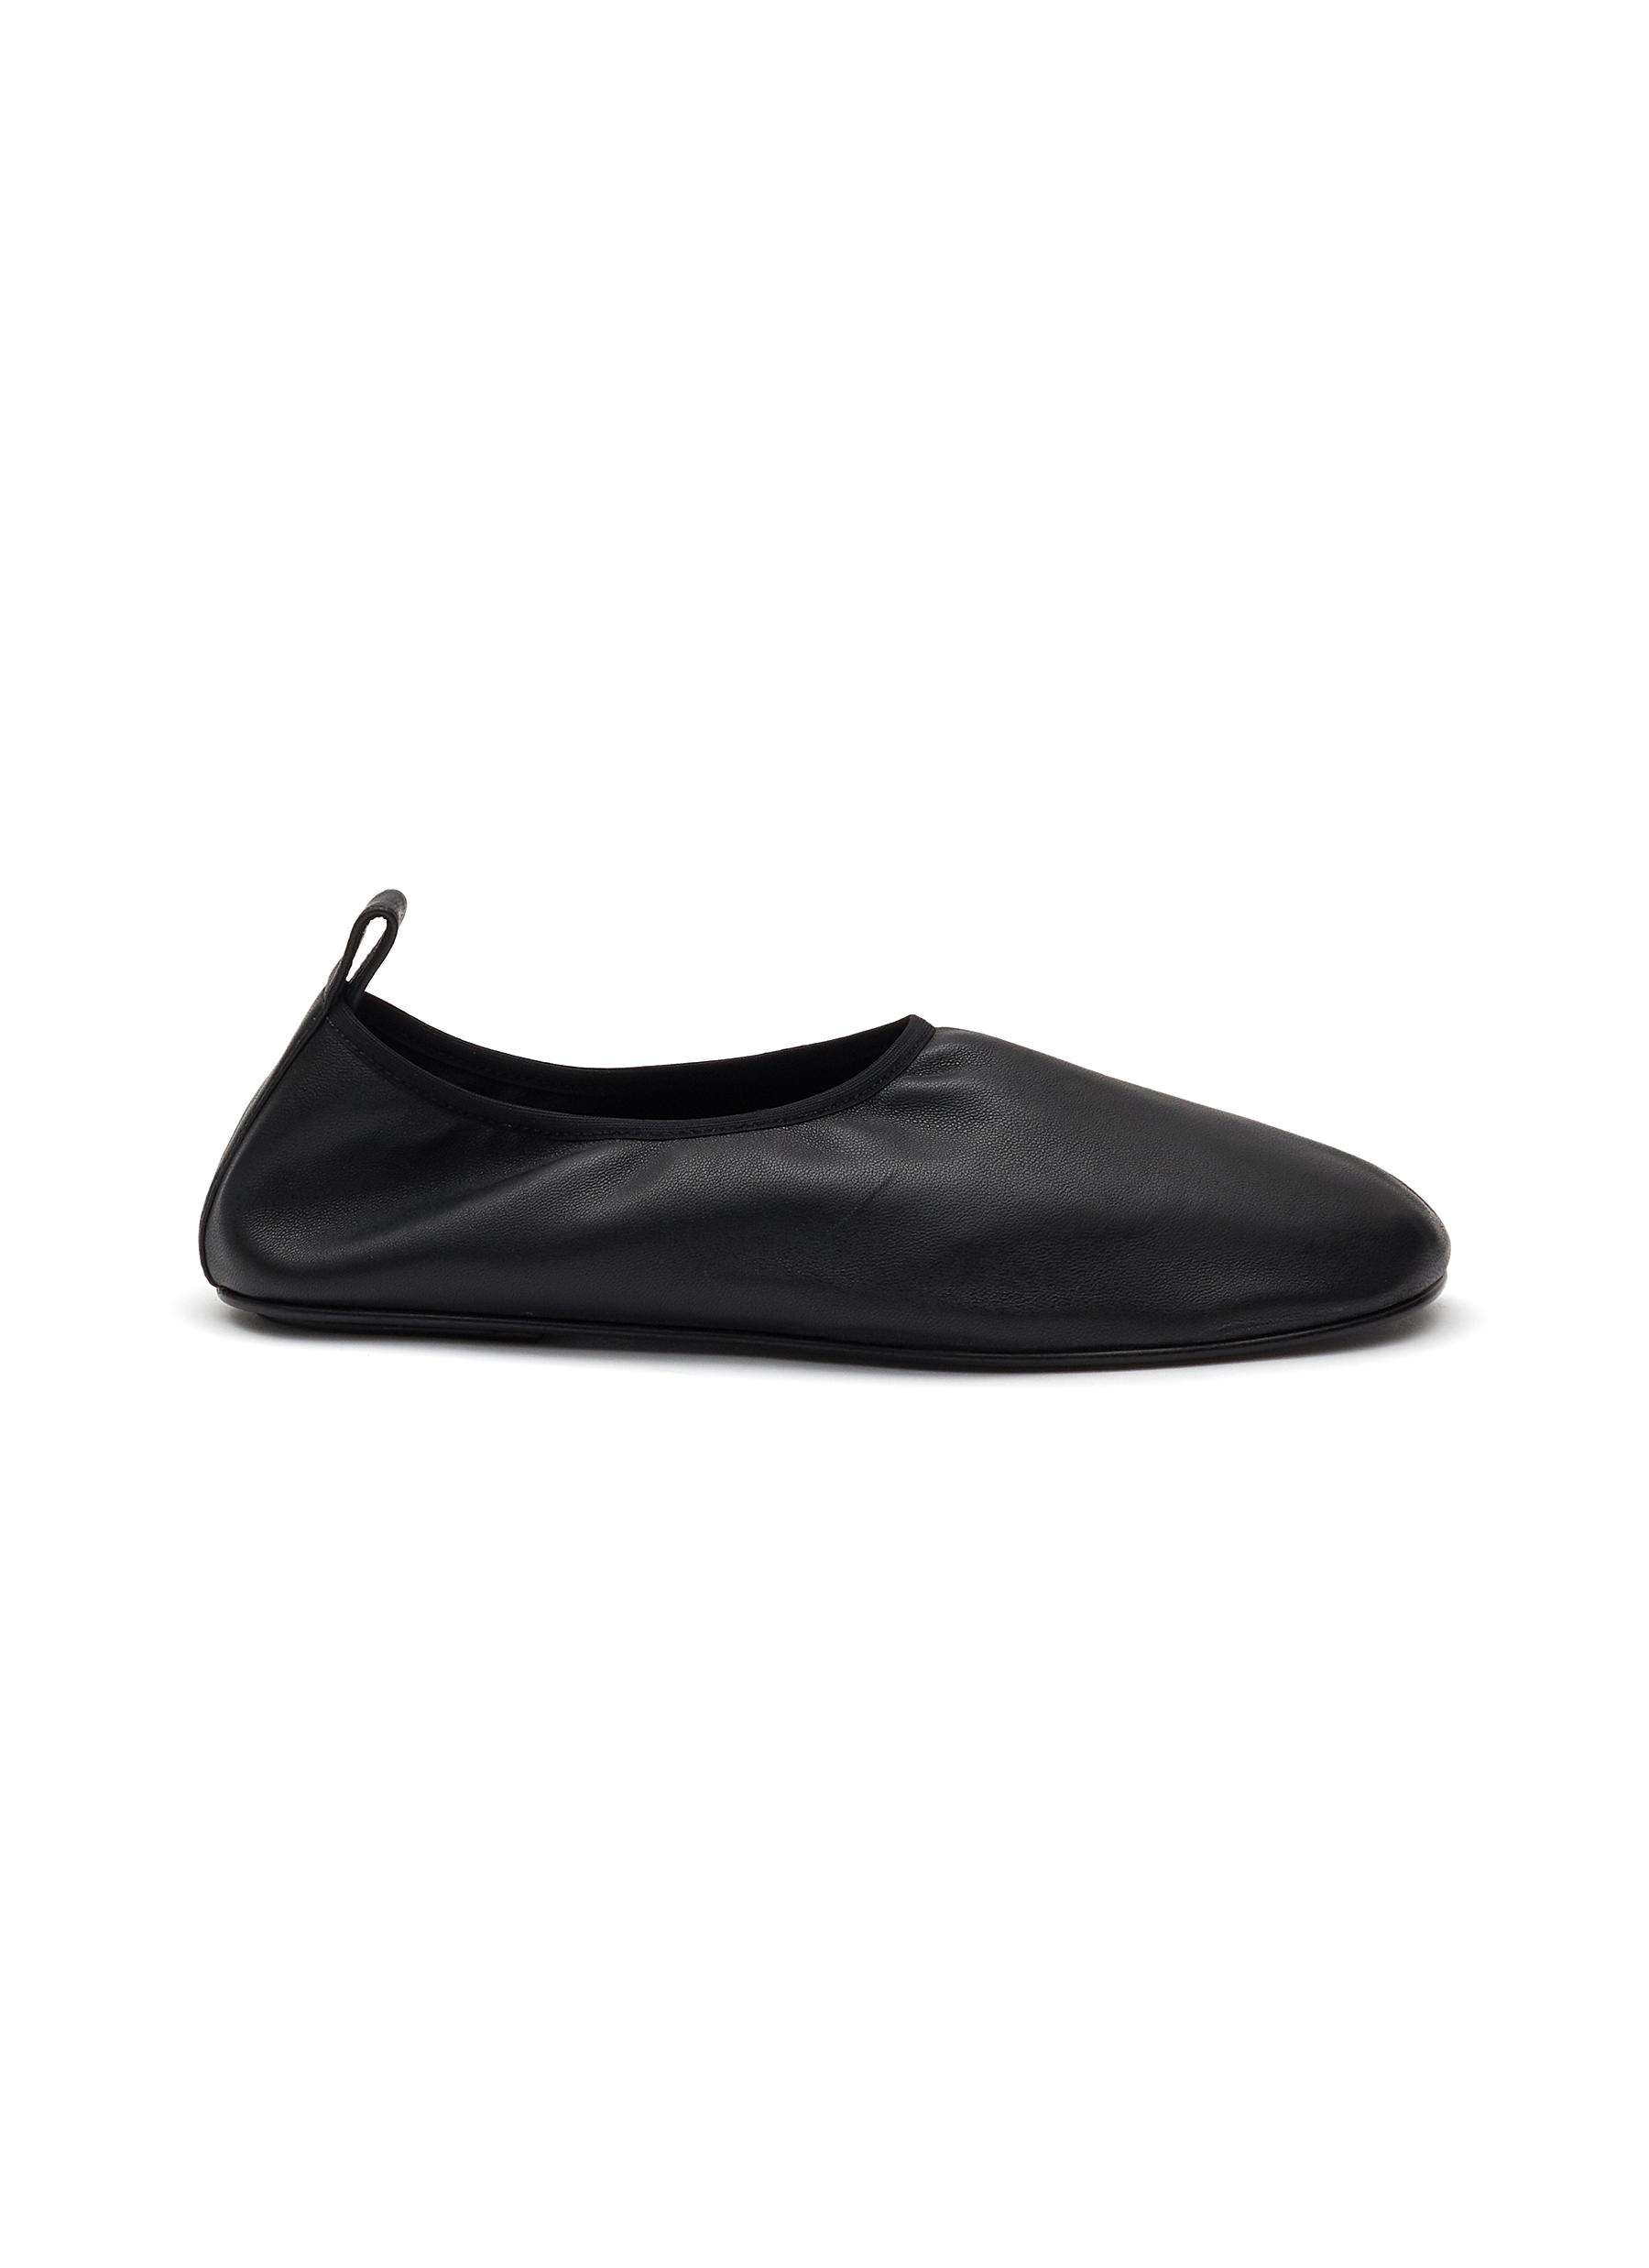 THE ROW 'Ozzy' Nappa Leather Sock Slippers